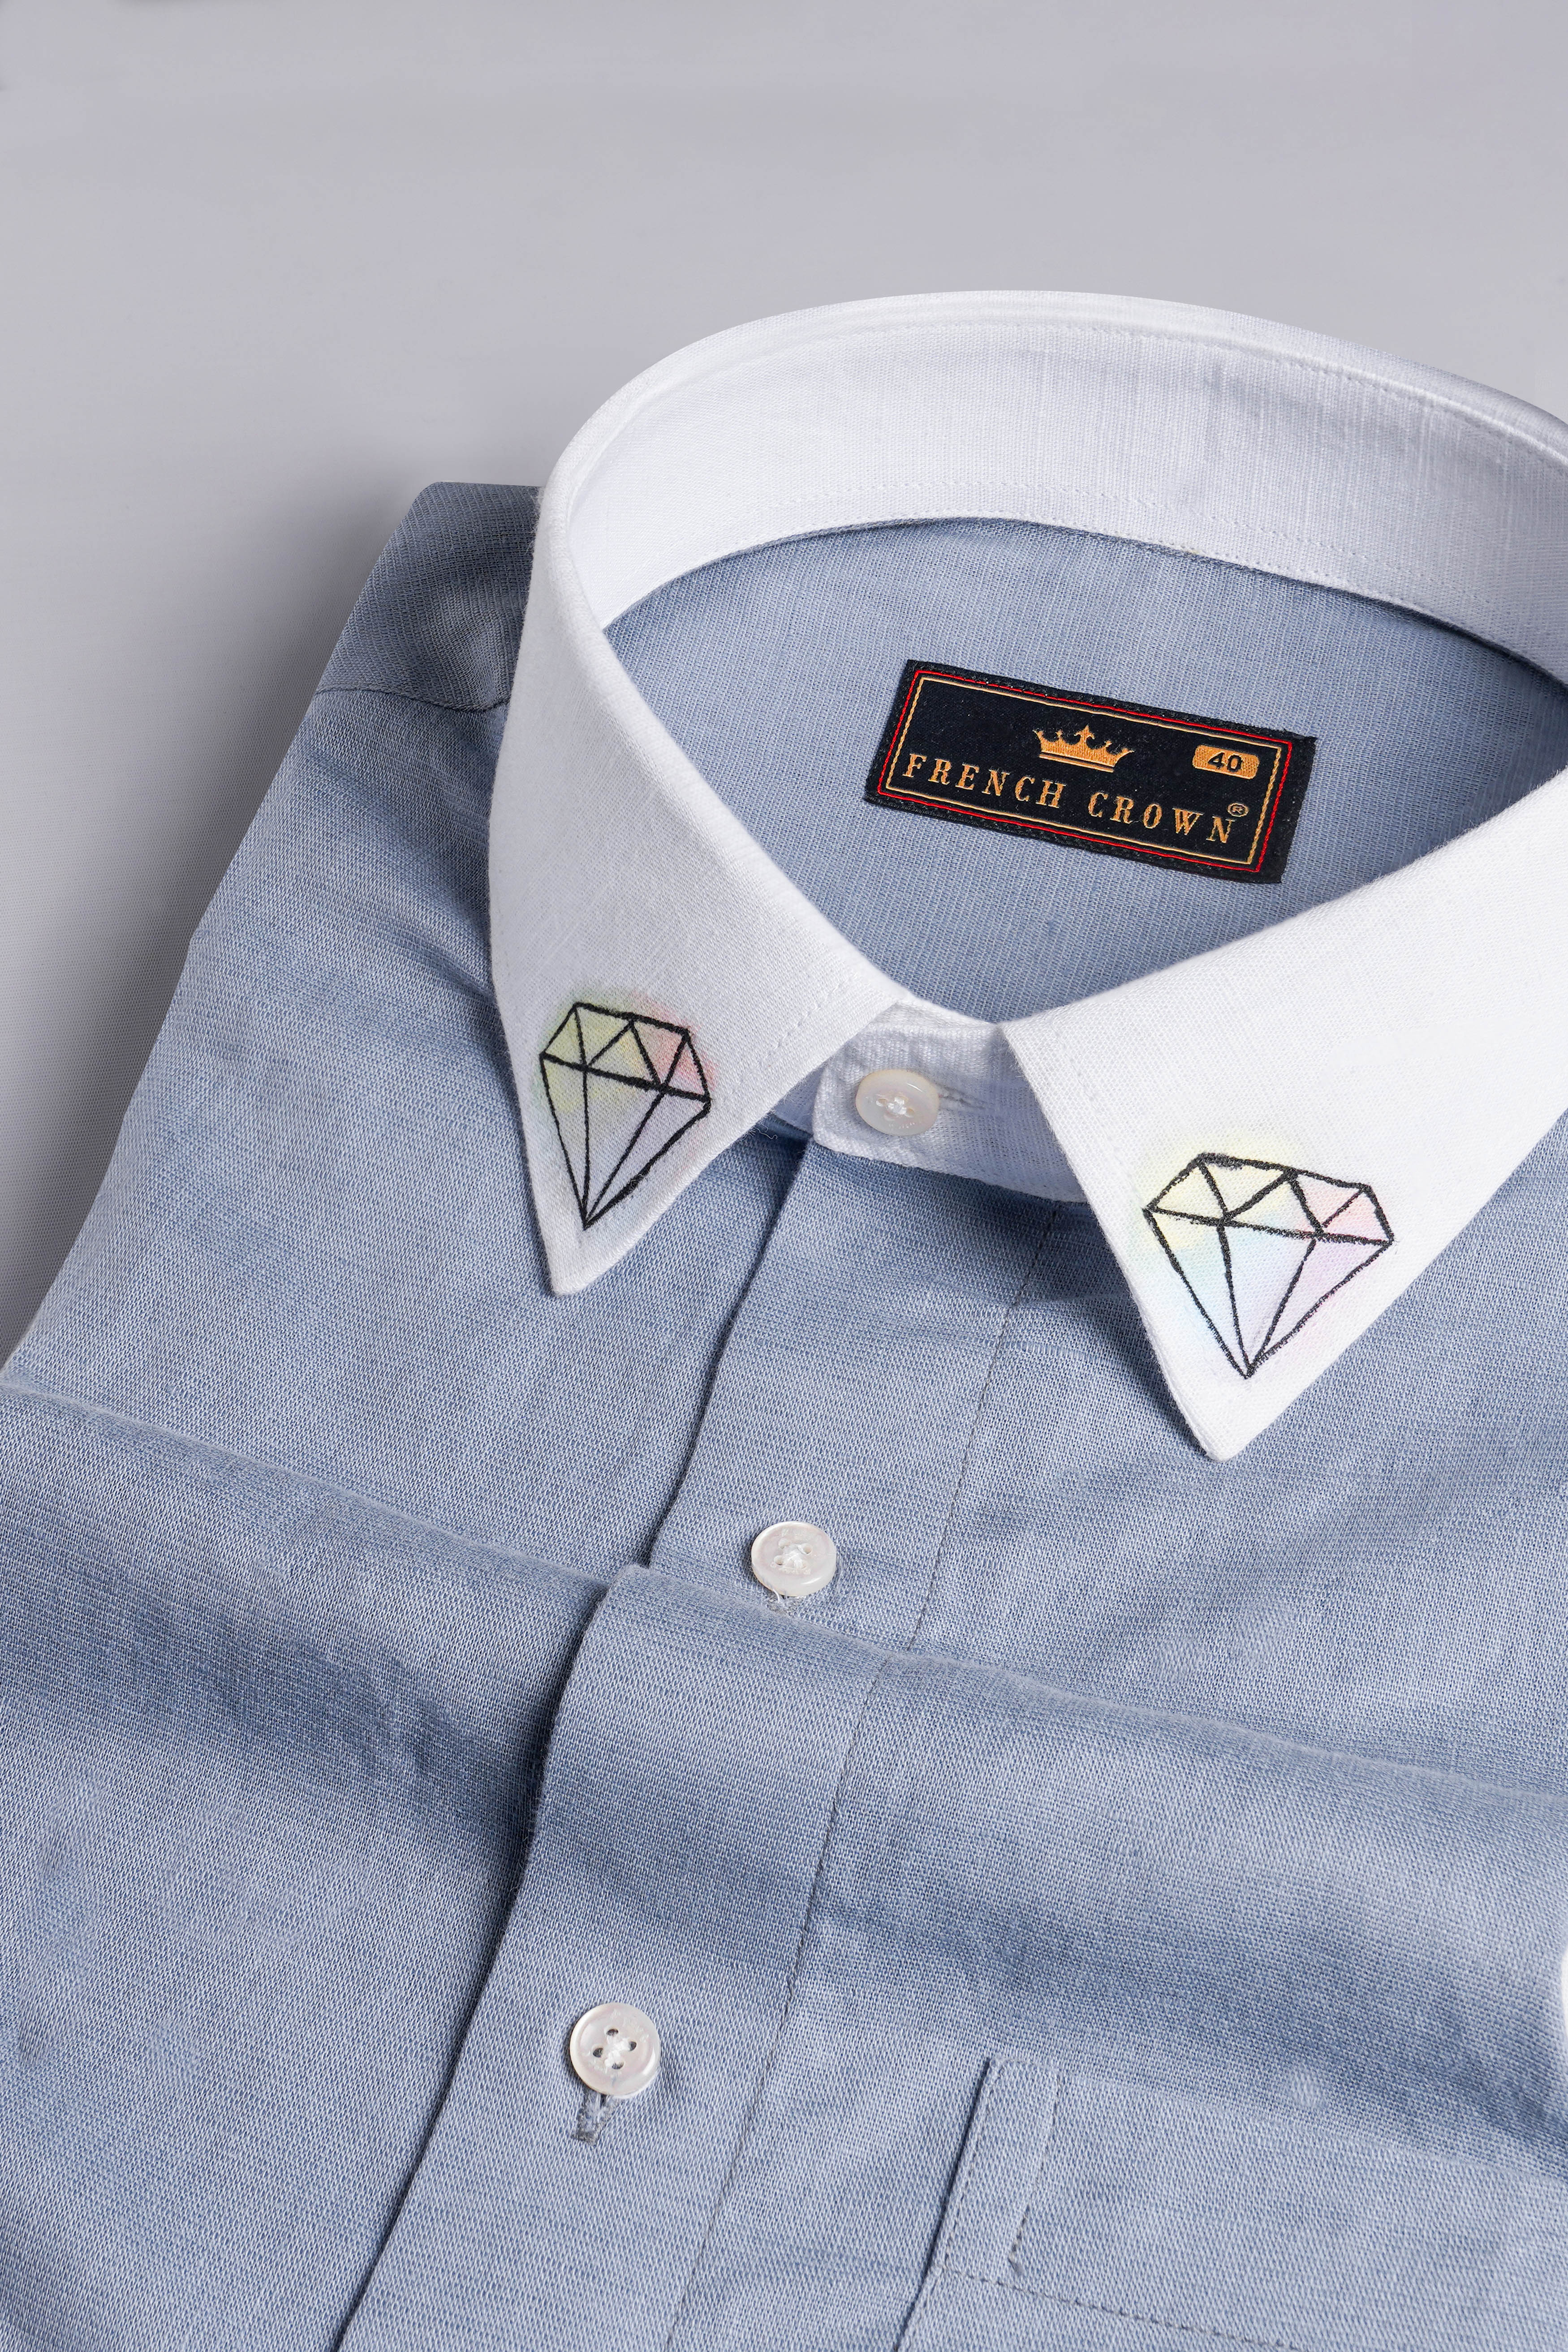 Yonder Blue with White Collar and Cuffs Hand Painted Luxurious Linen Designer Shirt